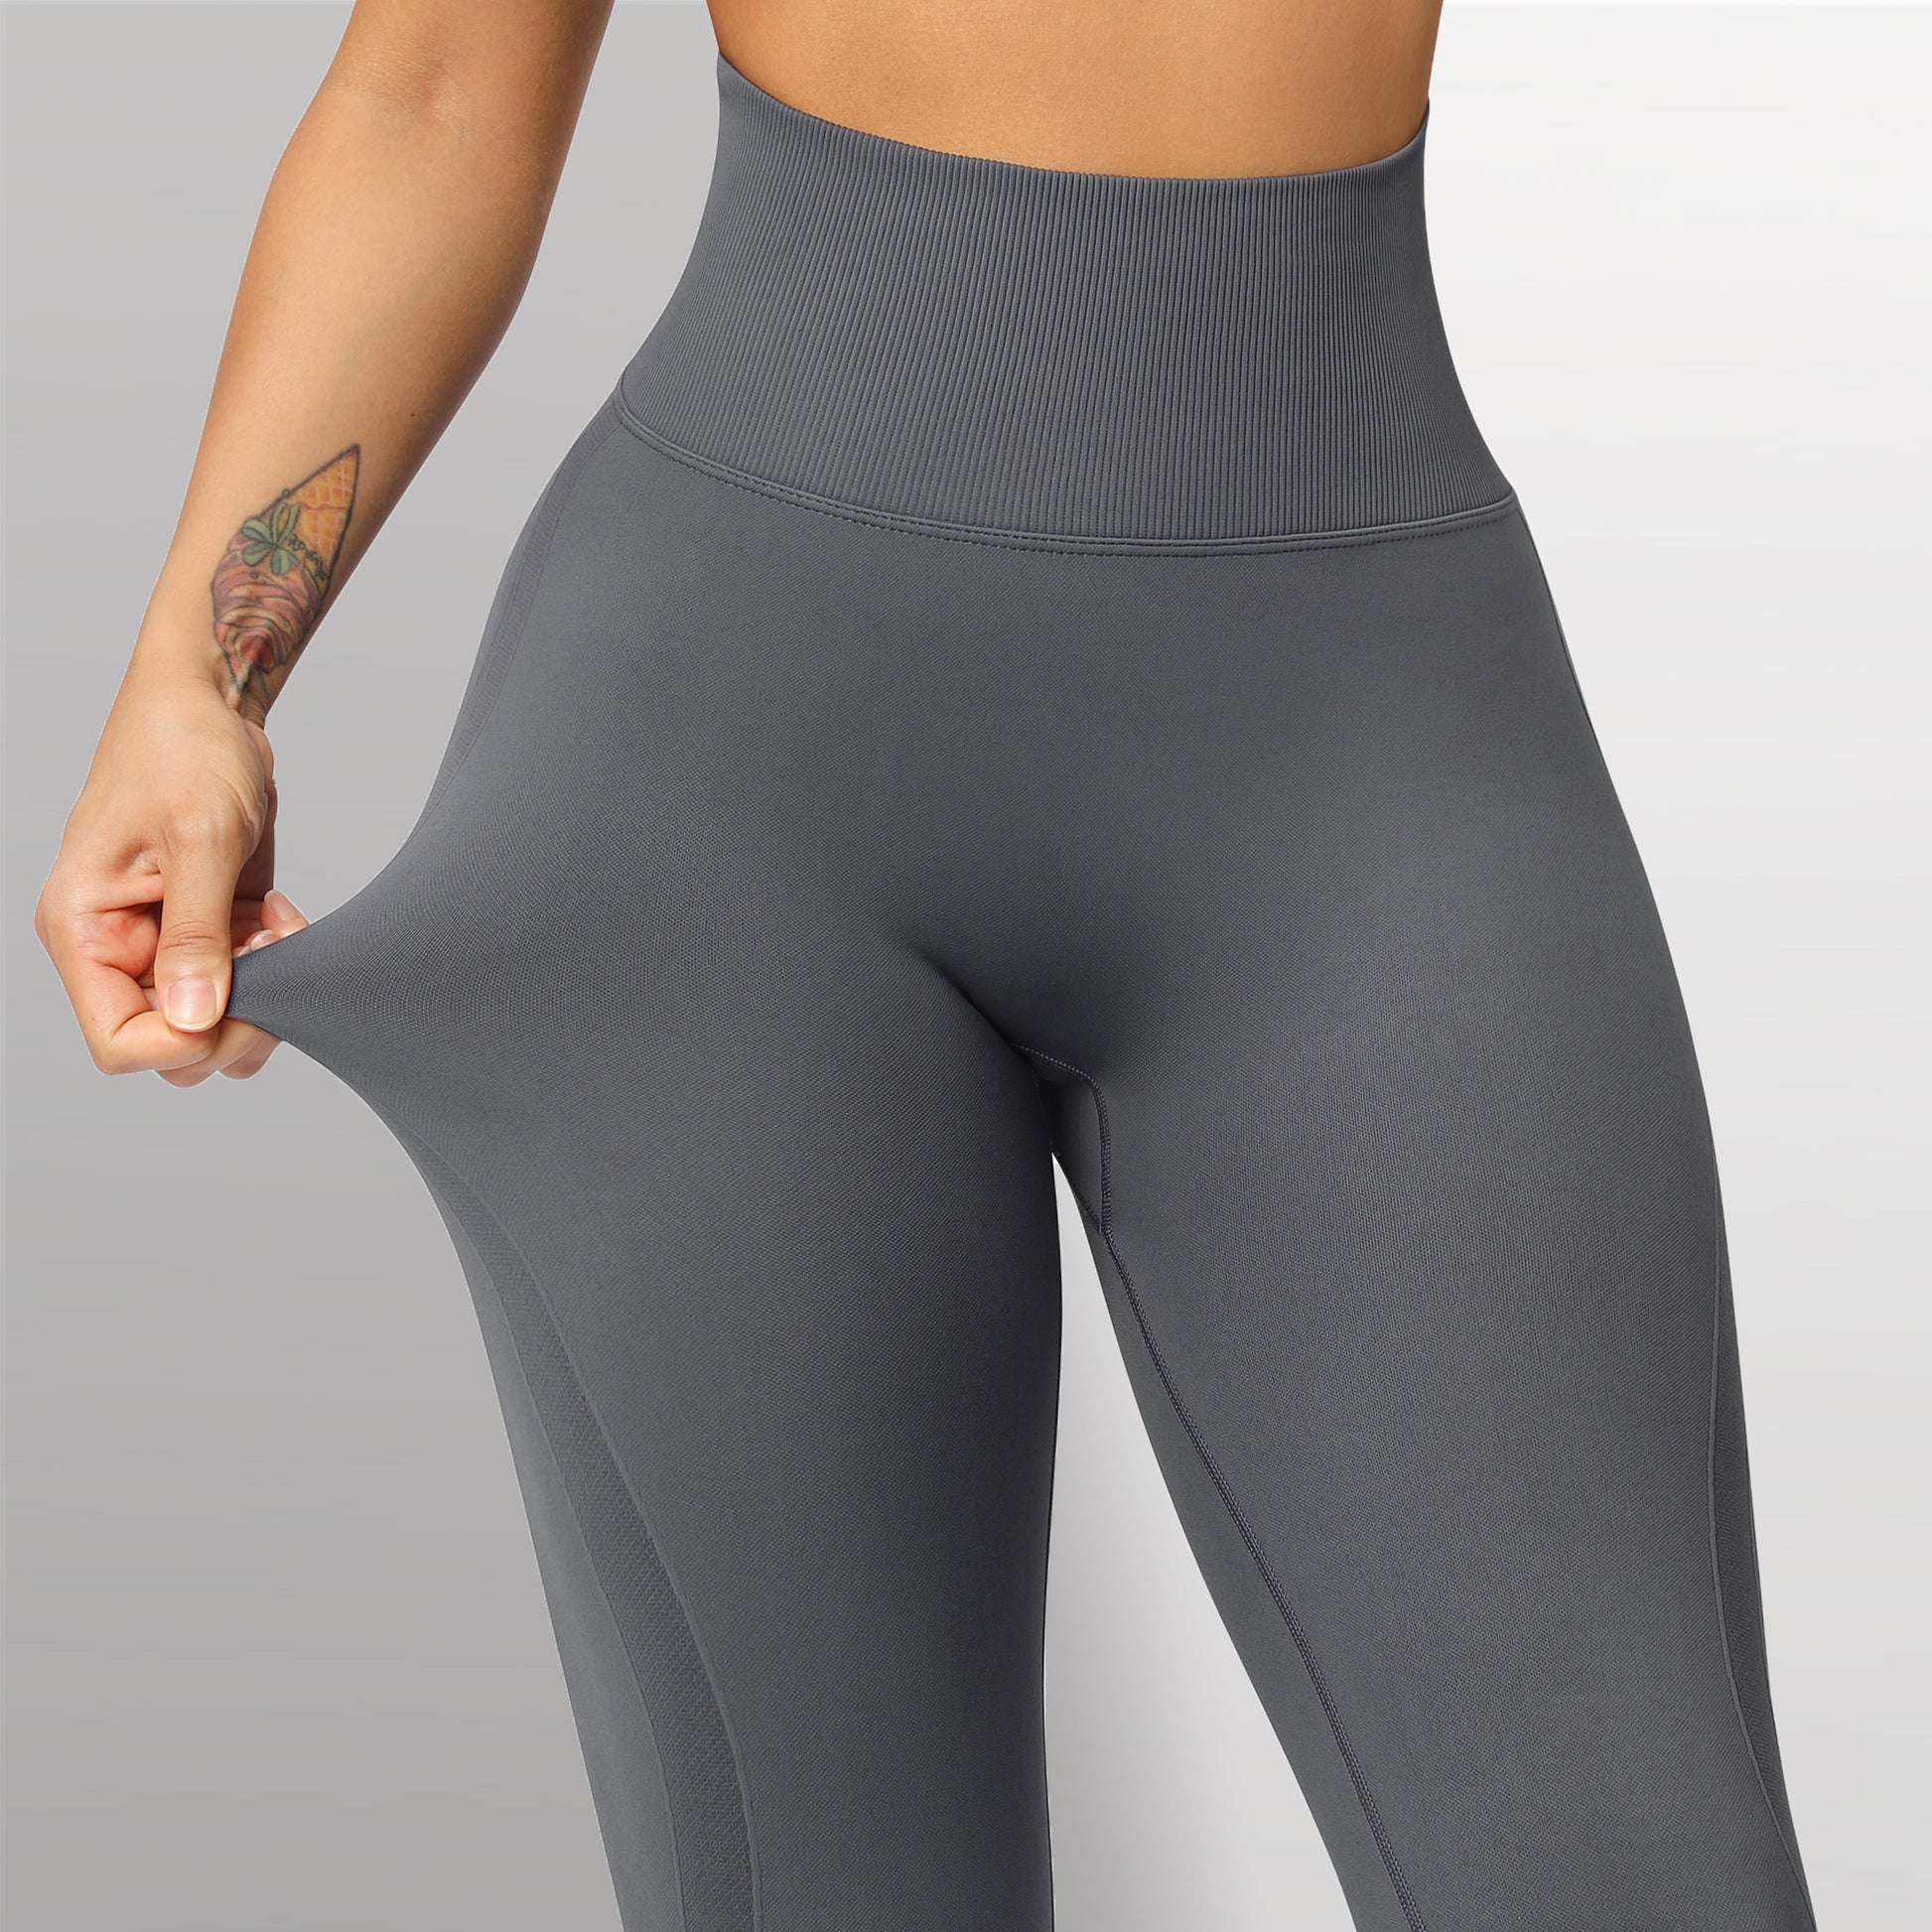 RUUHEE High Waist Seamless Push Up Seamless Workout Leggings For Women  Perfect For Fitness, Running, Yoga, Gym And Workout Tight Trousers For  Sports And Fitness 210929 From Kong003, $10.95